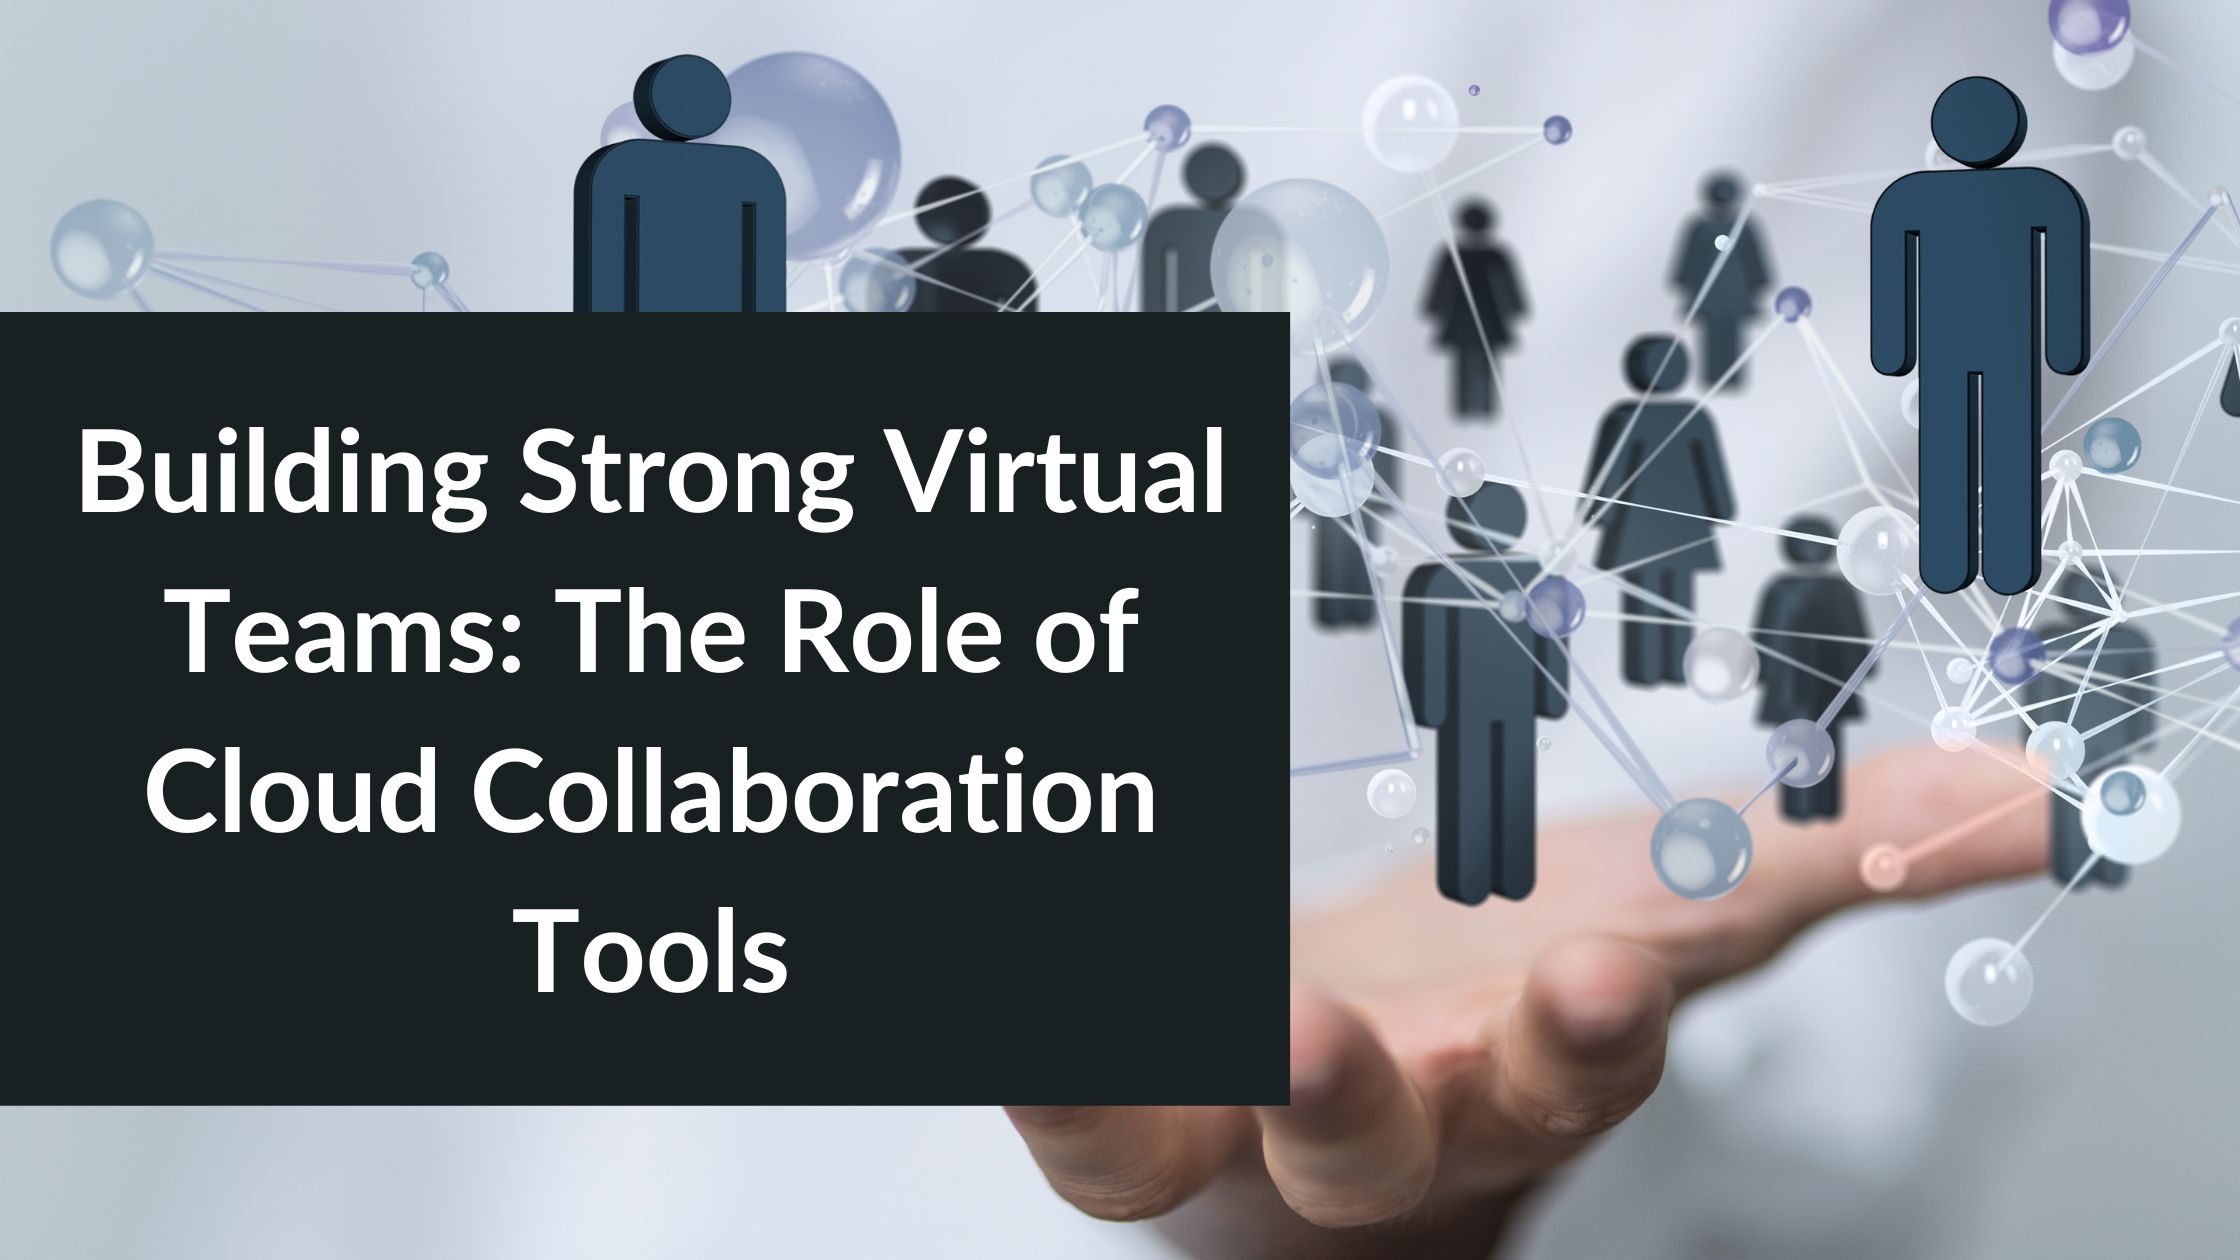 Building Strong Virtual Teams: The Role of Cloud Collaboration Tools